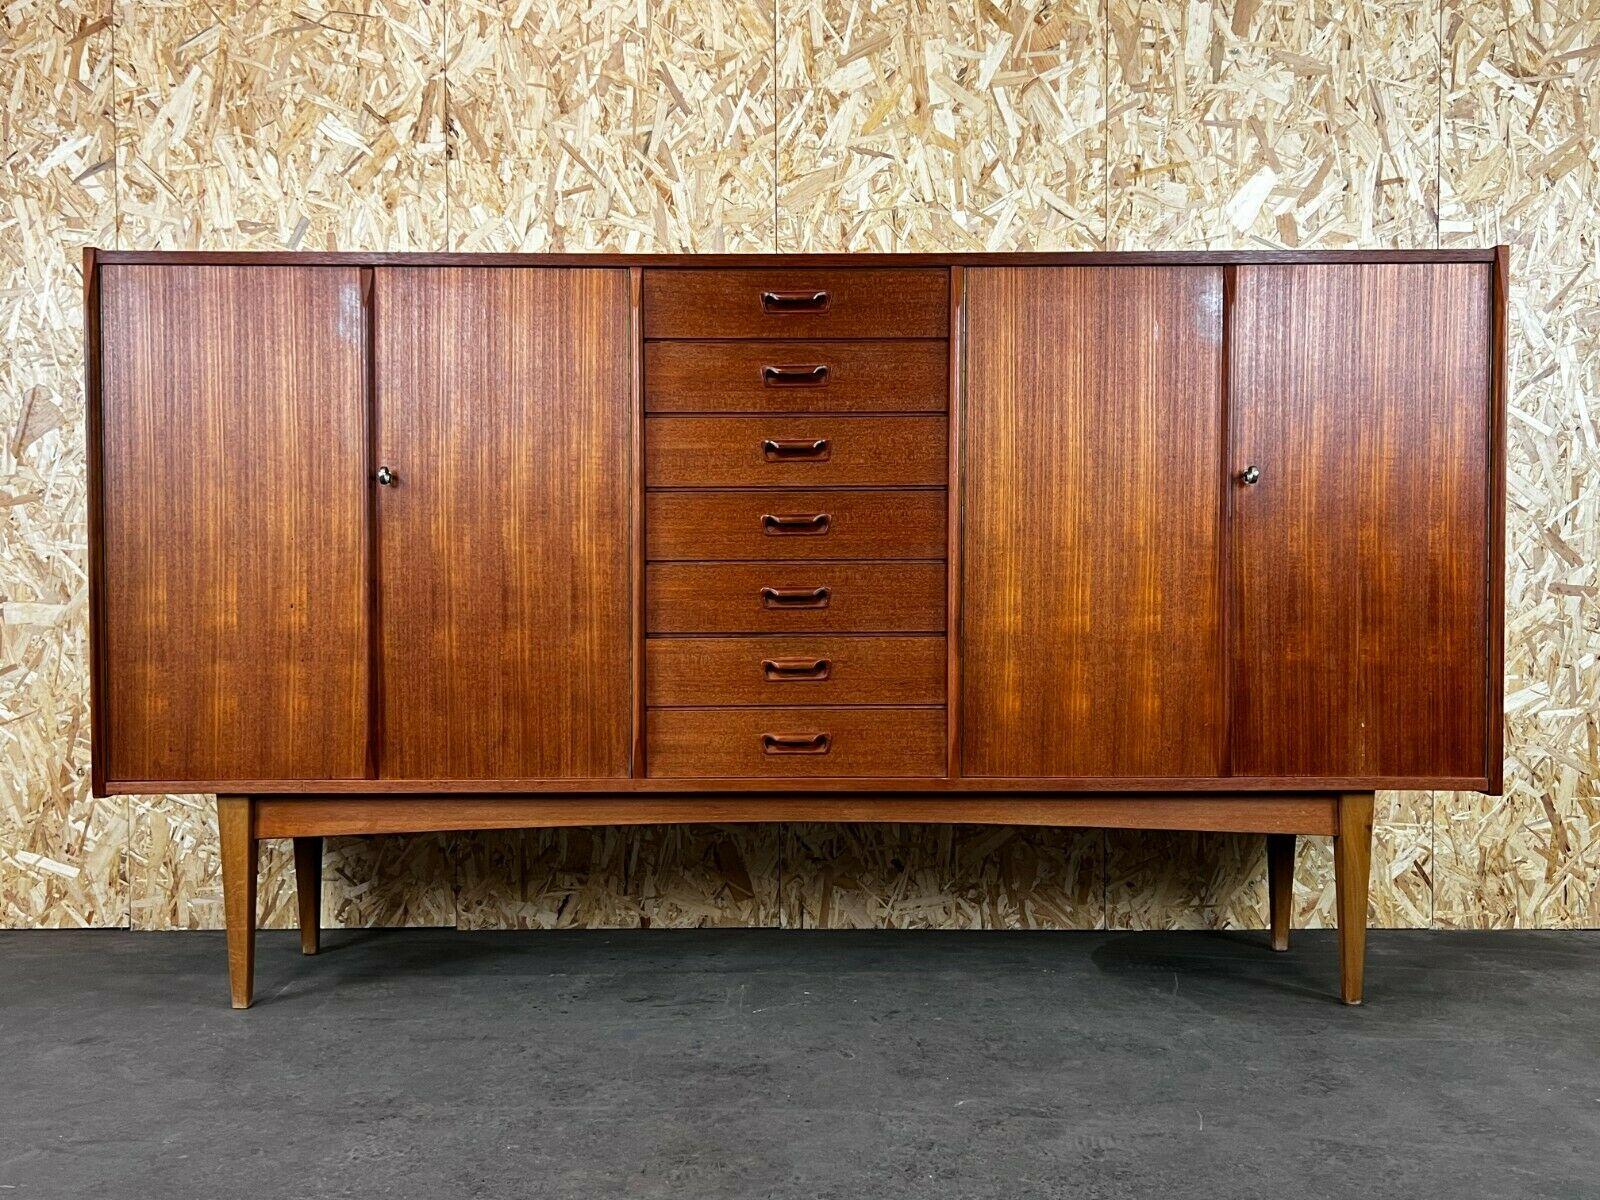 F60s 70s teak sideboard credenza highboard Danish Design Denmark 60s 70s

Object: sideboard

Manufacturer:

Condition: good

Age: around 1960-1970

Dimensions:

220cm x 45.5cm x 119cm

Other notes:

The pictures serve as part of the